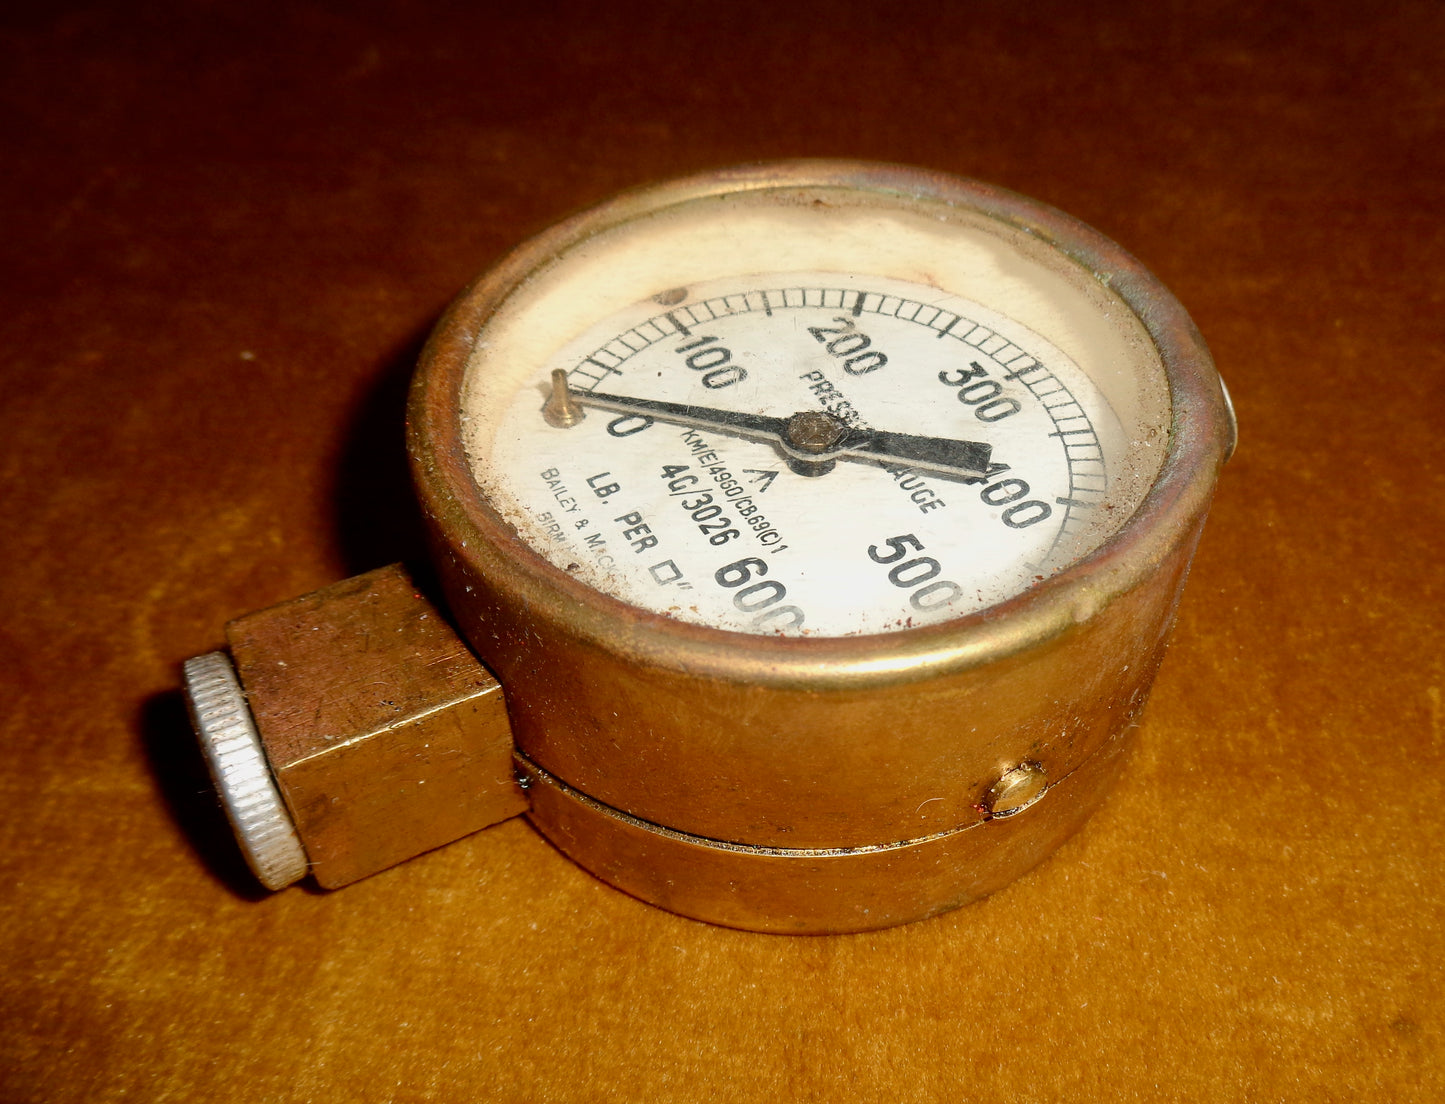 Vintage Brass Military Pressure Gauge 0-600 lb/Square Inch Made By Bailey & Mackey